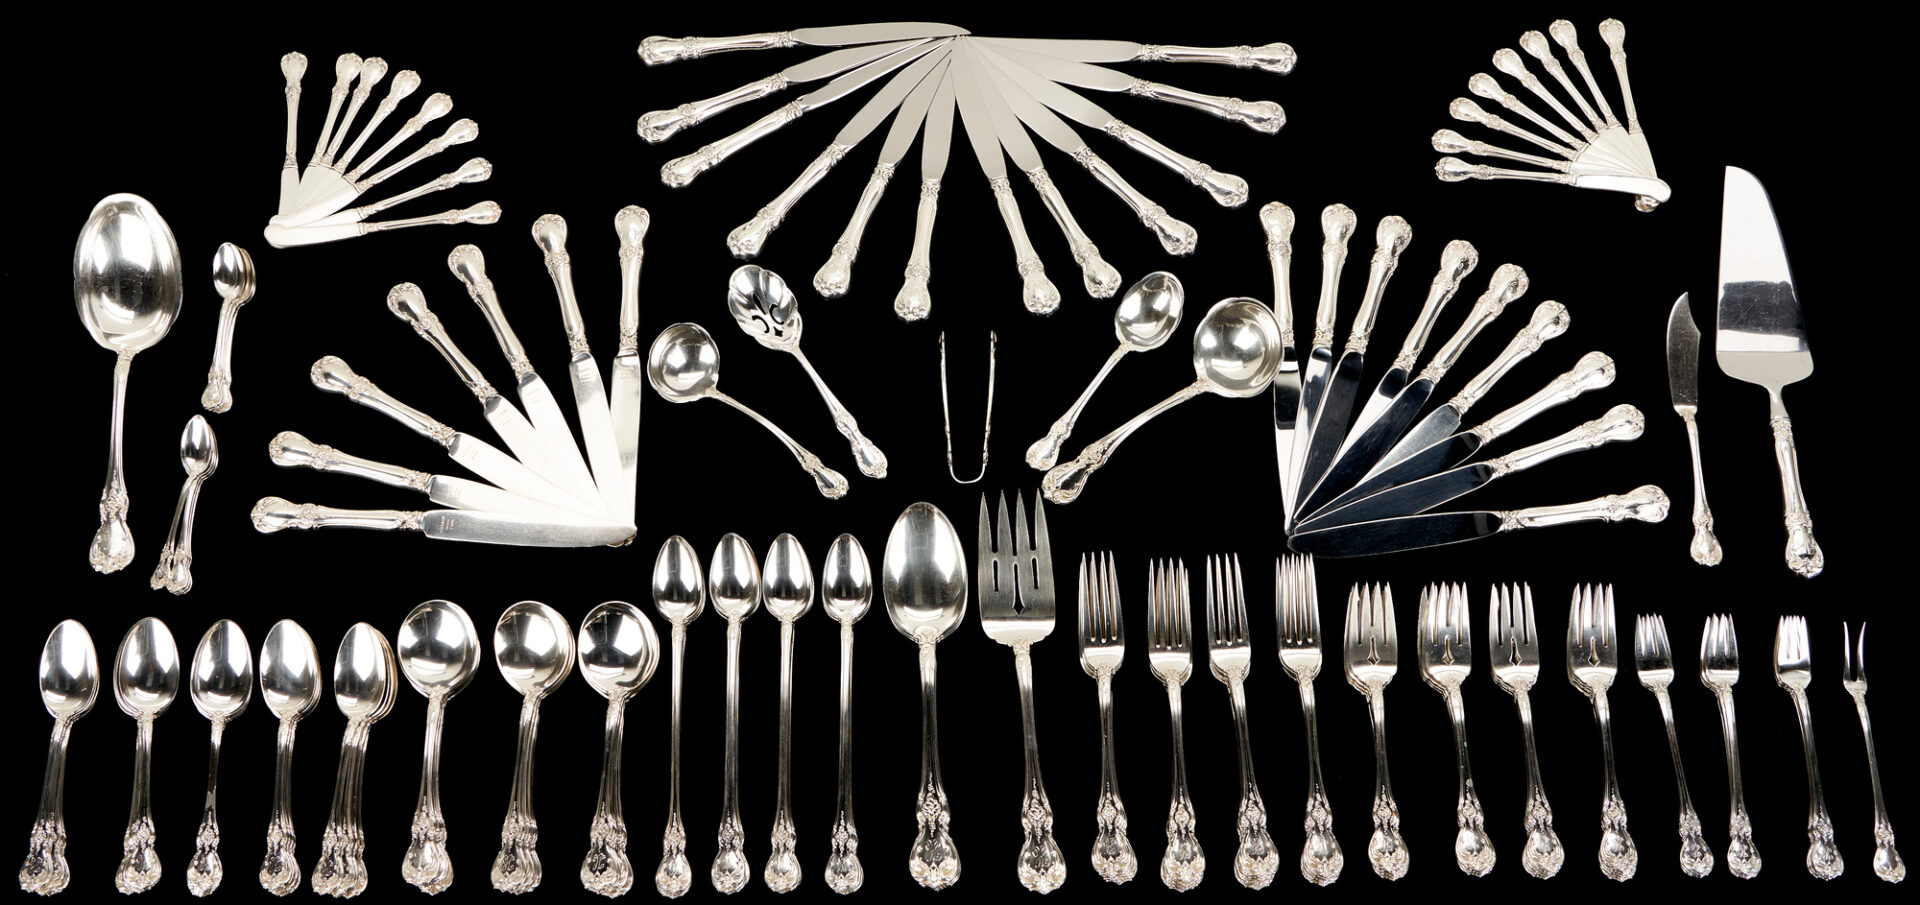 Lot 73: 158 Pcs. Towle Old Master Sterling Silver Flatware, Service for 12-16